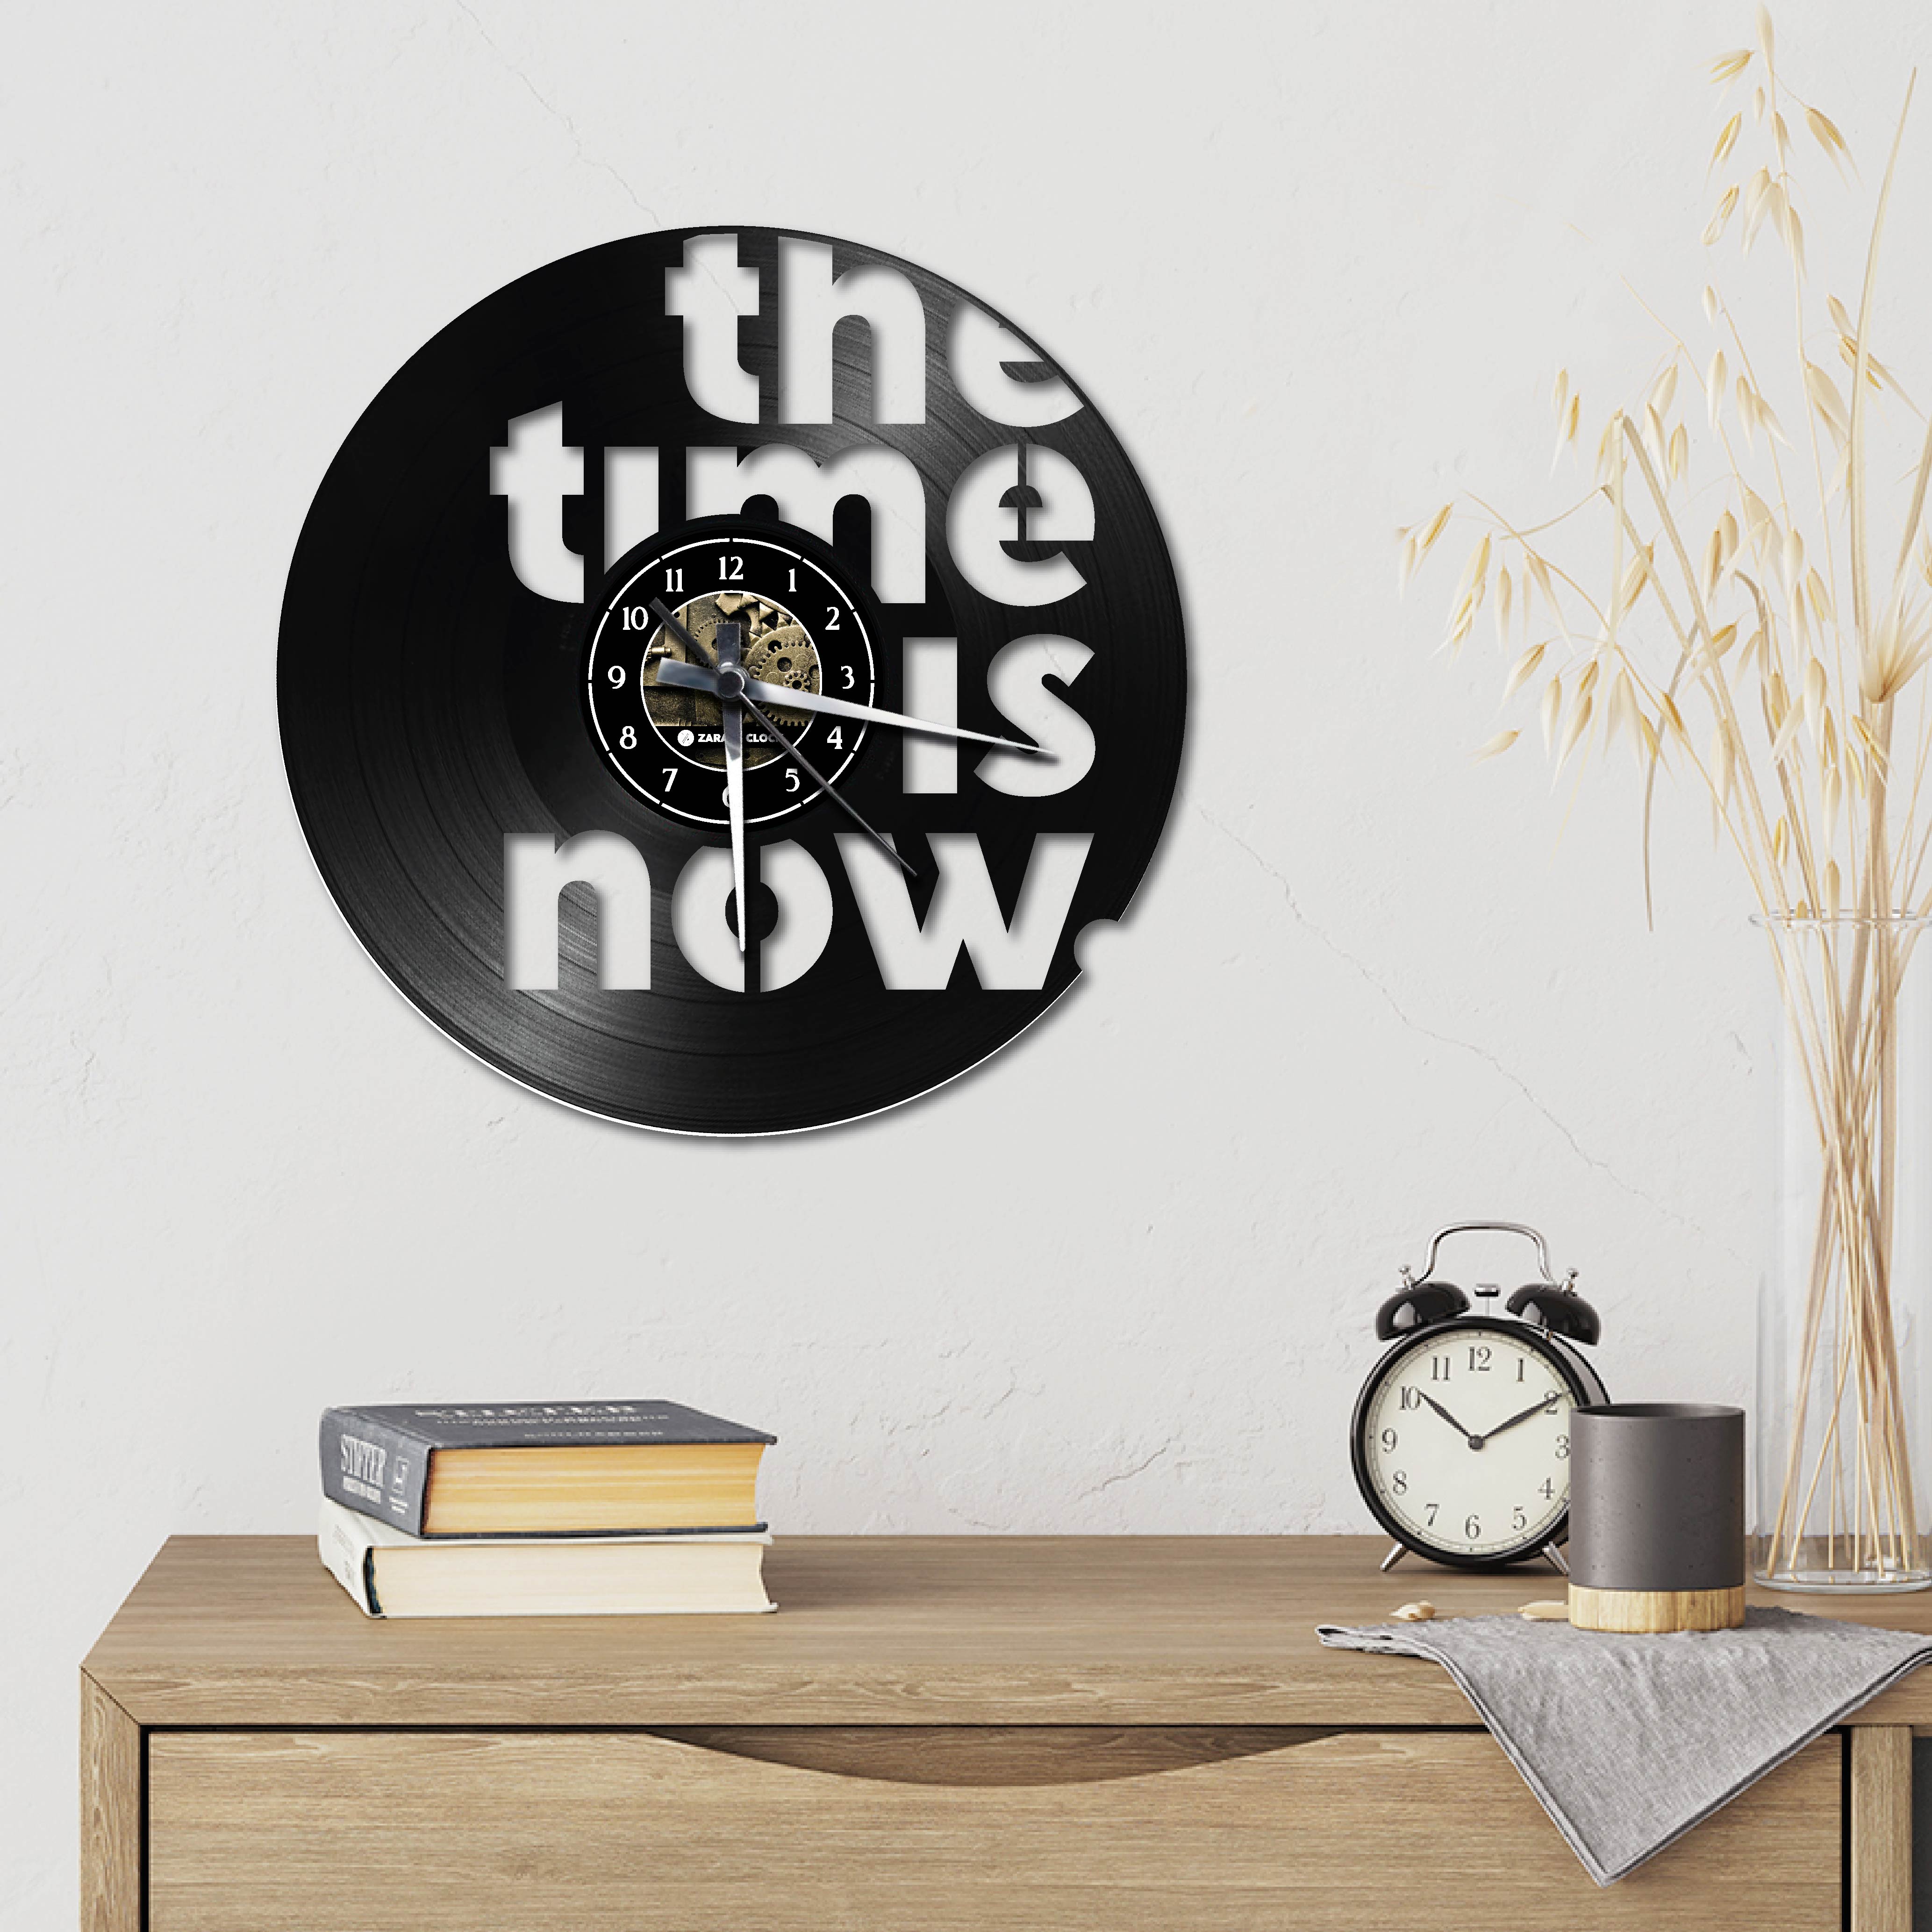 THE TIME IS NOW ✦ orologio in vinile